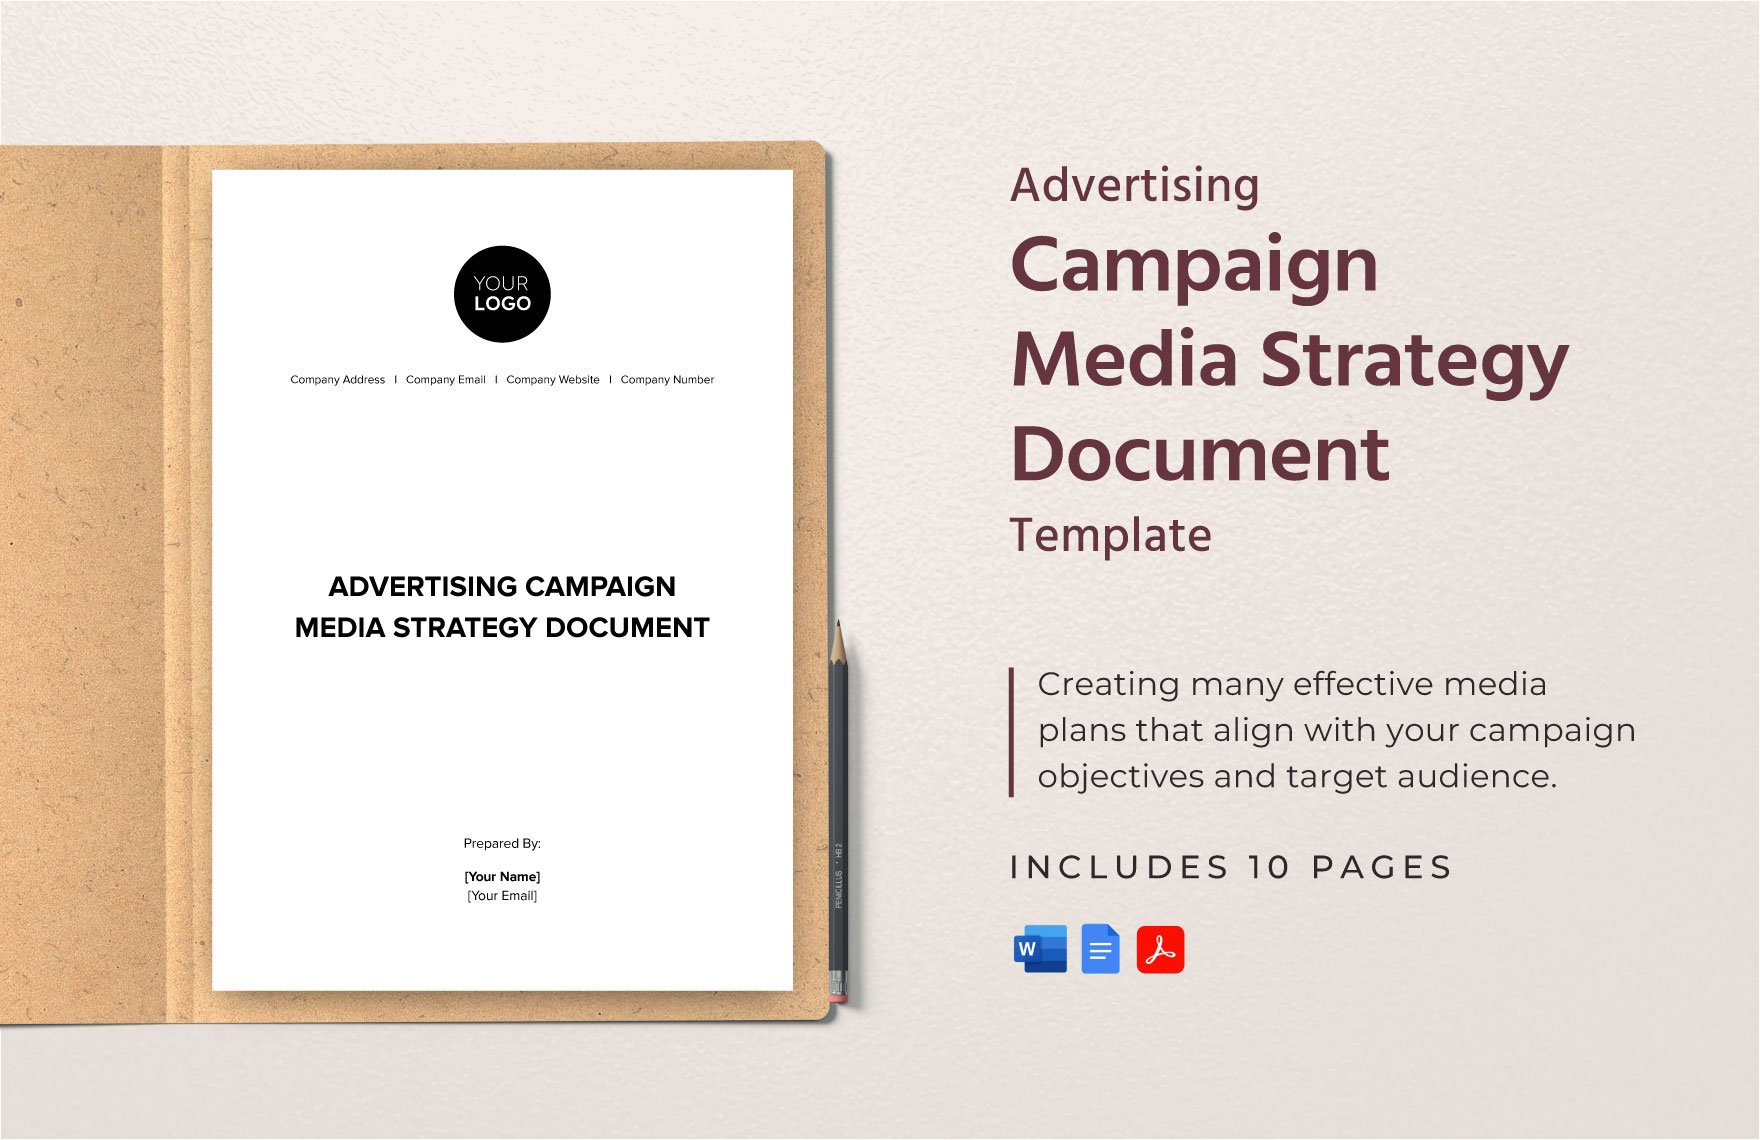 Advertising Campaign Media Strategy Document Template in Word, Google Docs, PDF